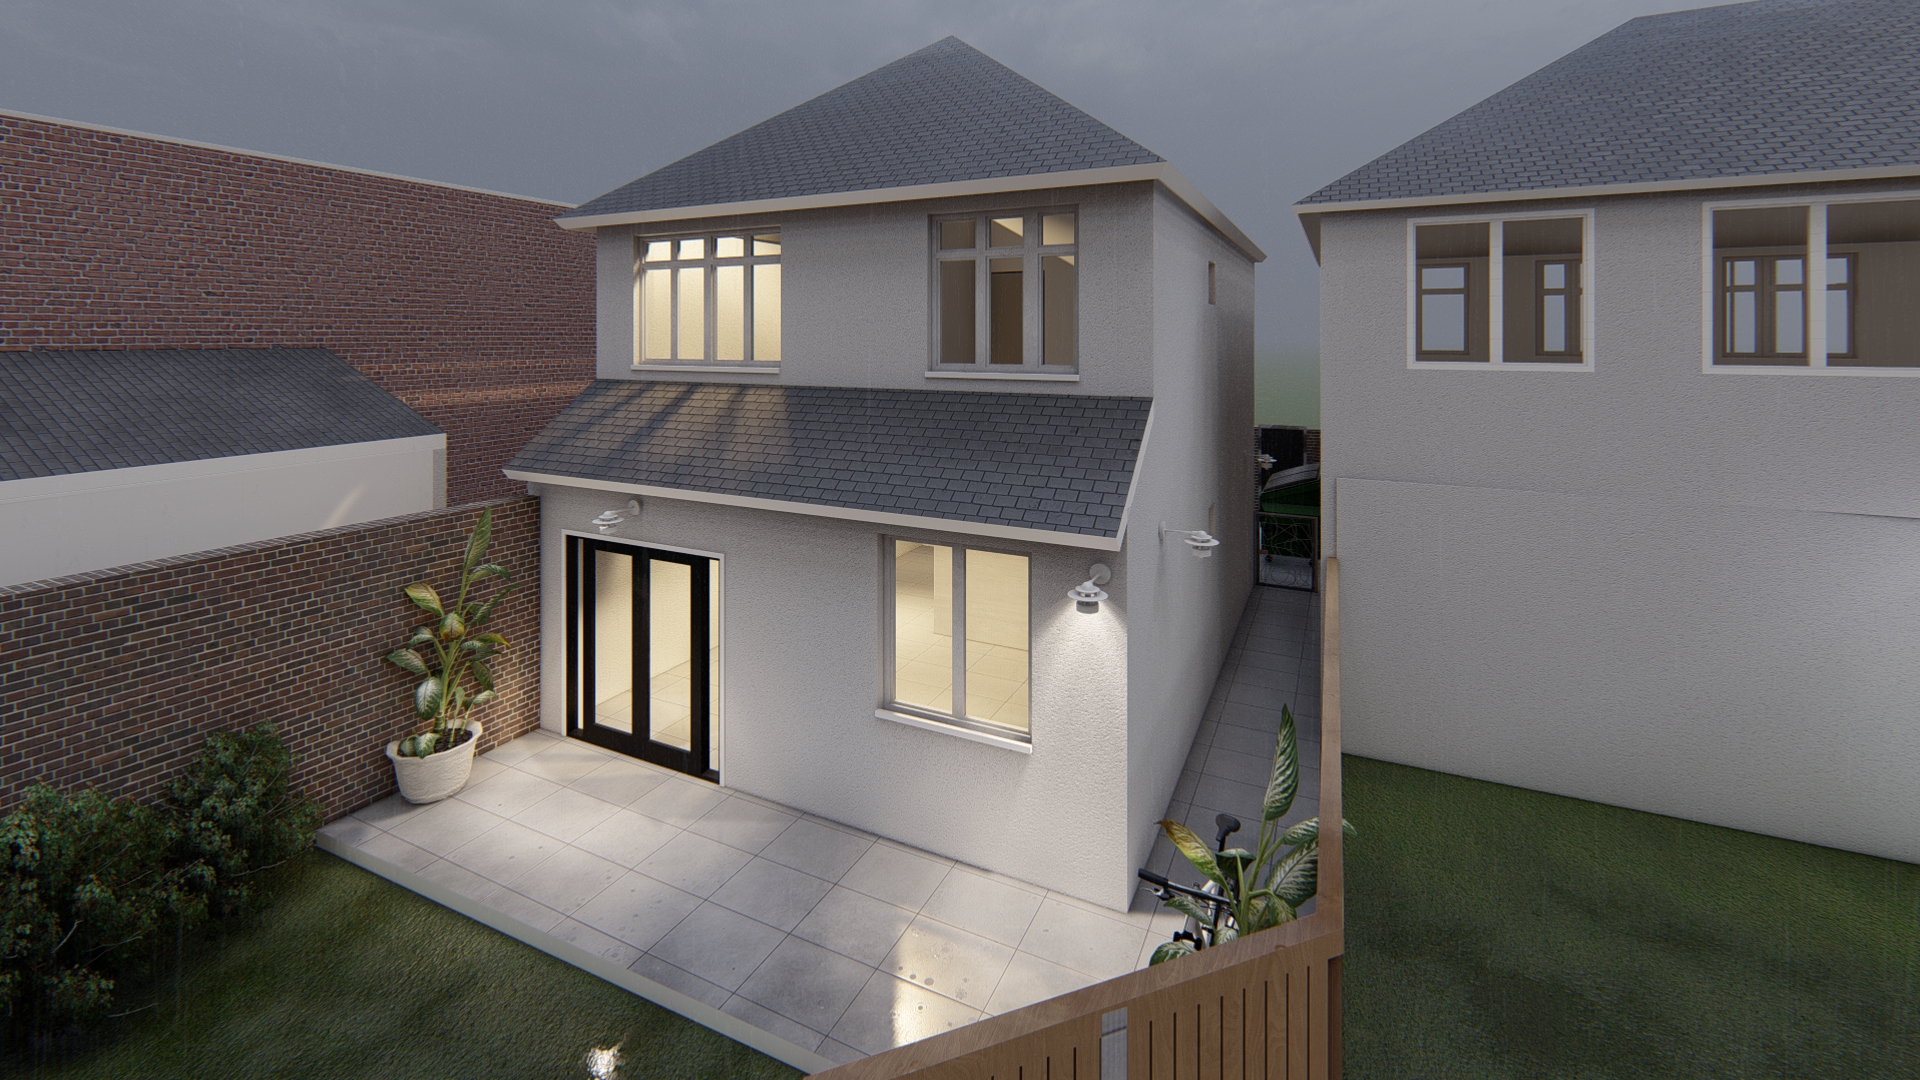 Printing House Lane, New Build House in Hayes